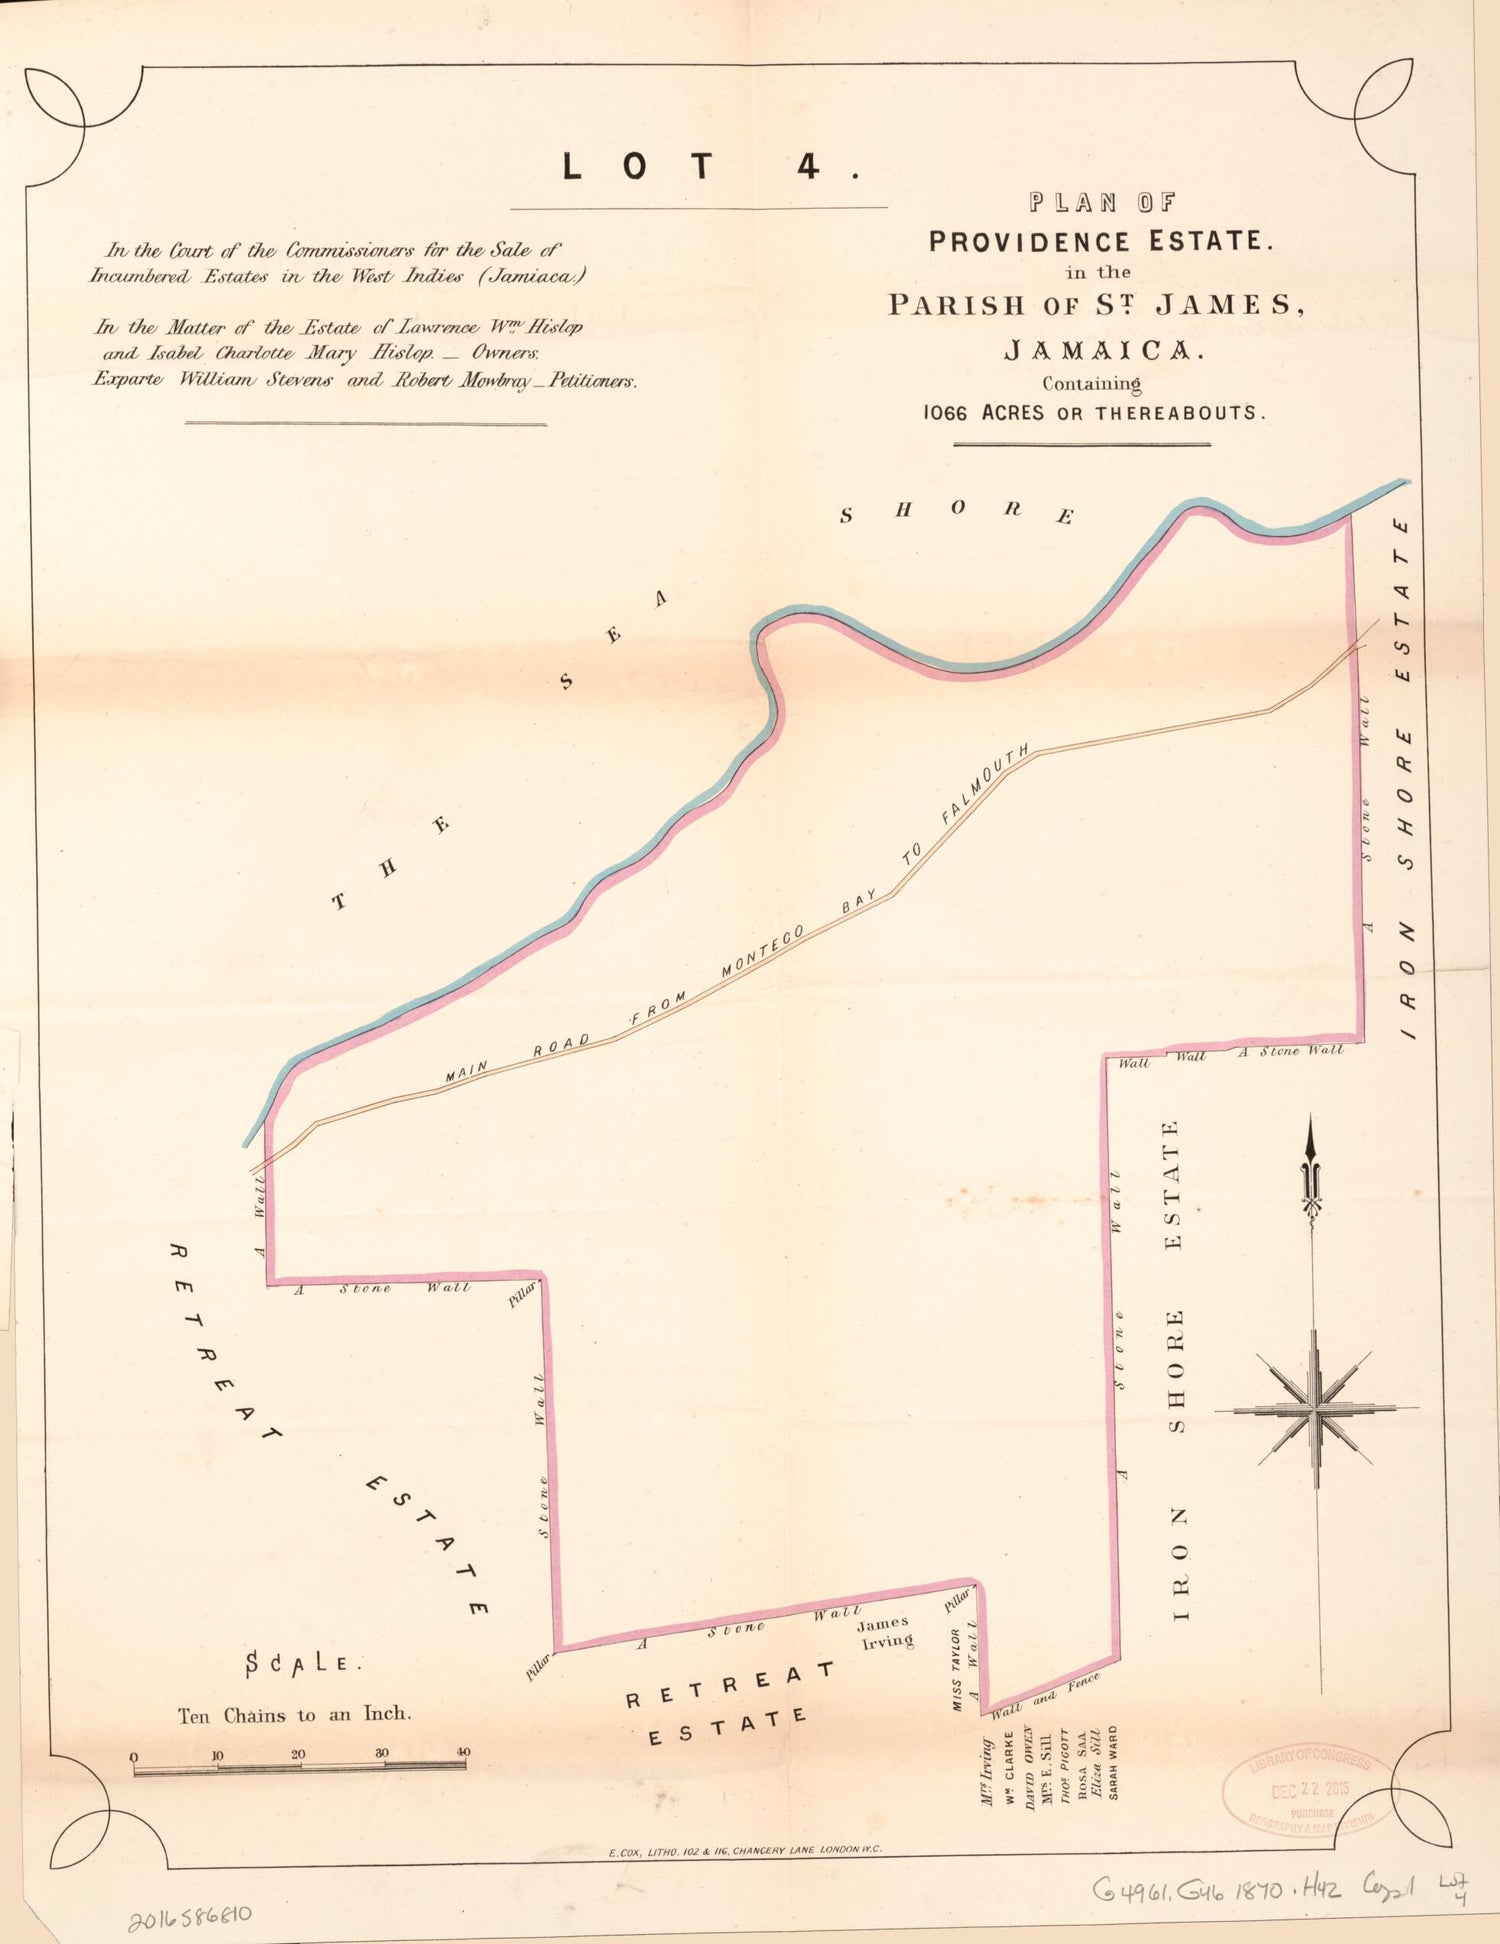 This old map of Lot 4. Plan of Providence Estate from Encumbered Estates In the West Indies (Jamaica) from 1870 was created by Vaughan &amp; Leifchild (Firm) Hards in 1870